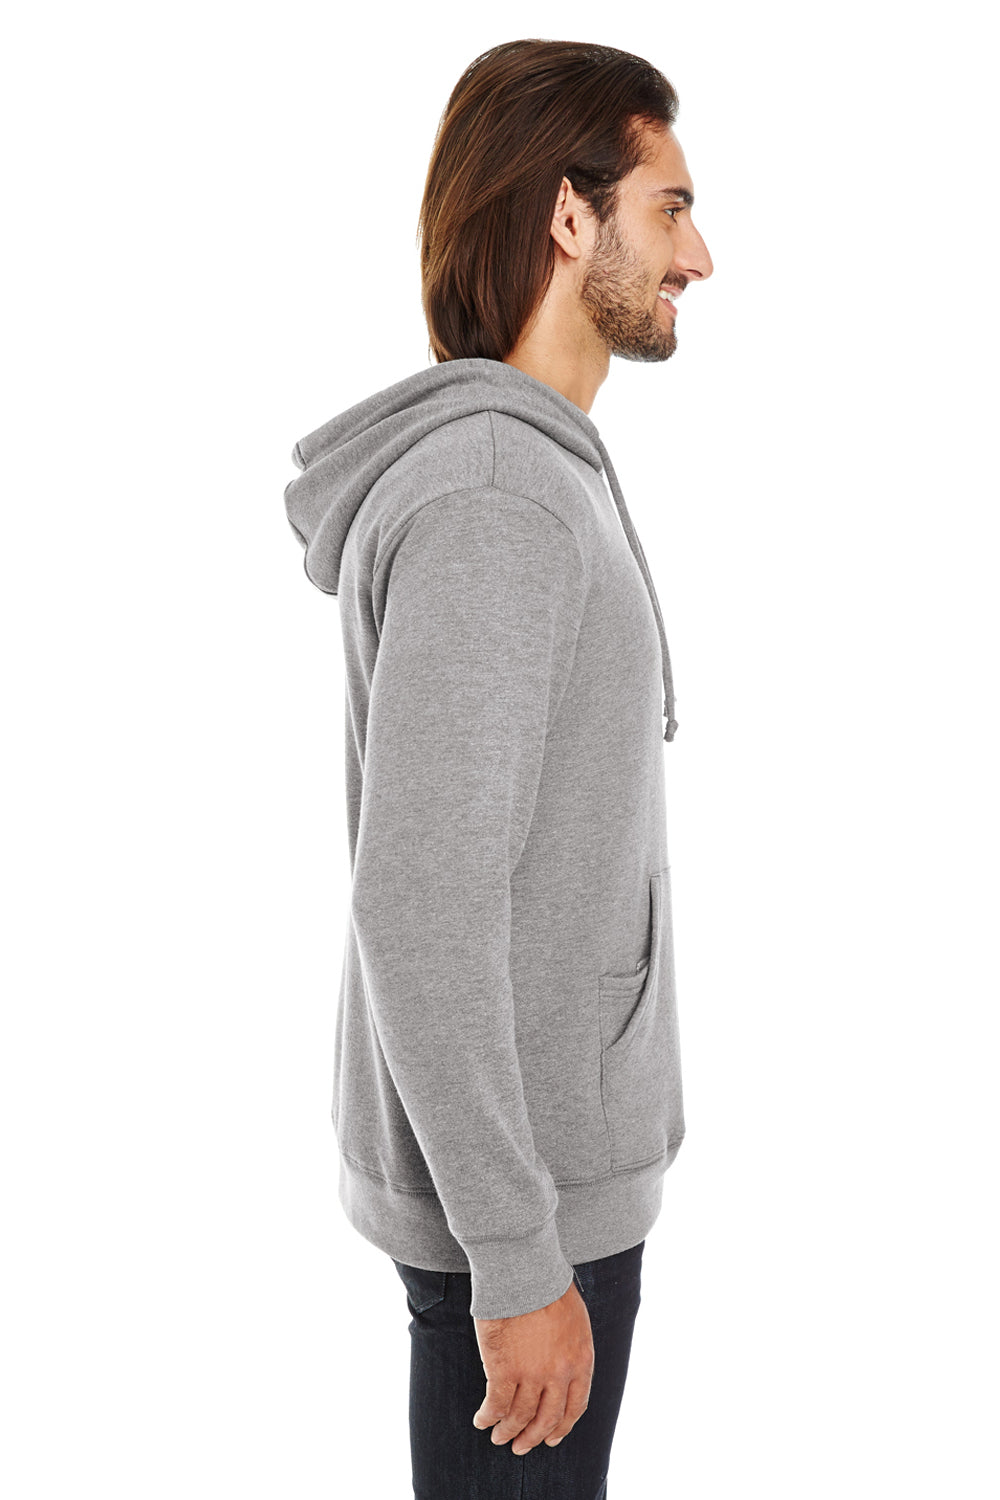 Threadfast Apparel 321H Mens French Terry Hooded Sweatshirt Hoodie Heather Charcoal Grey Side